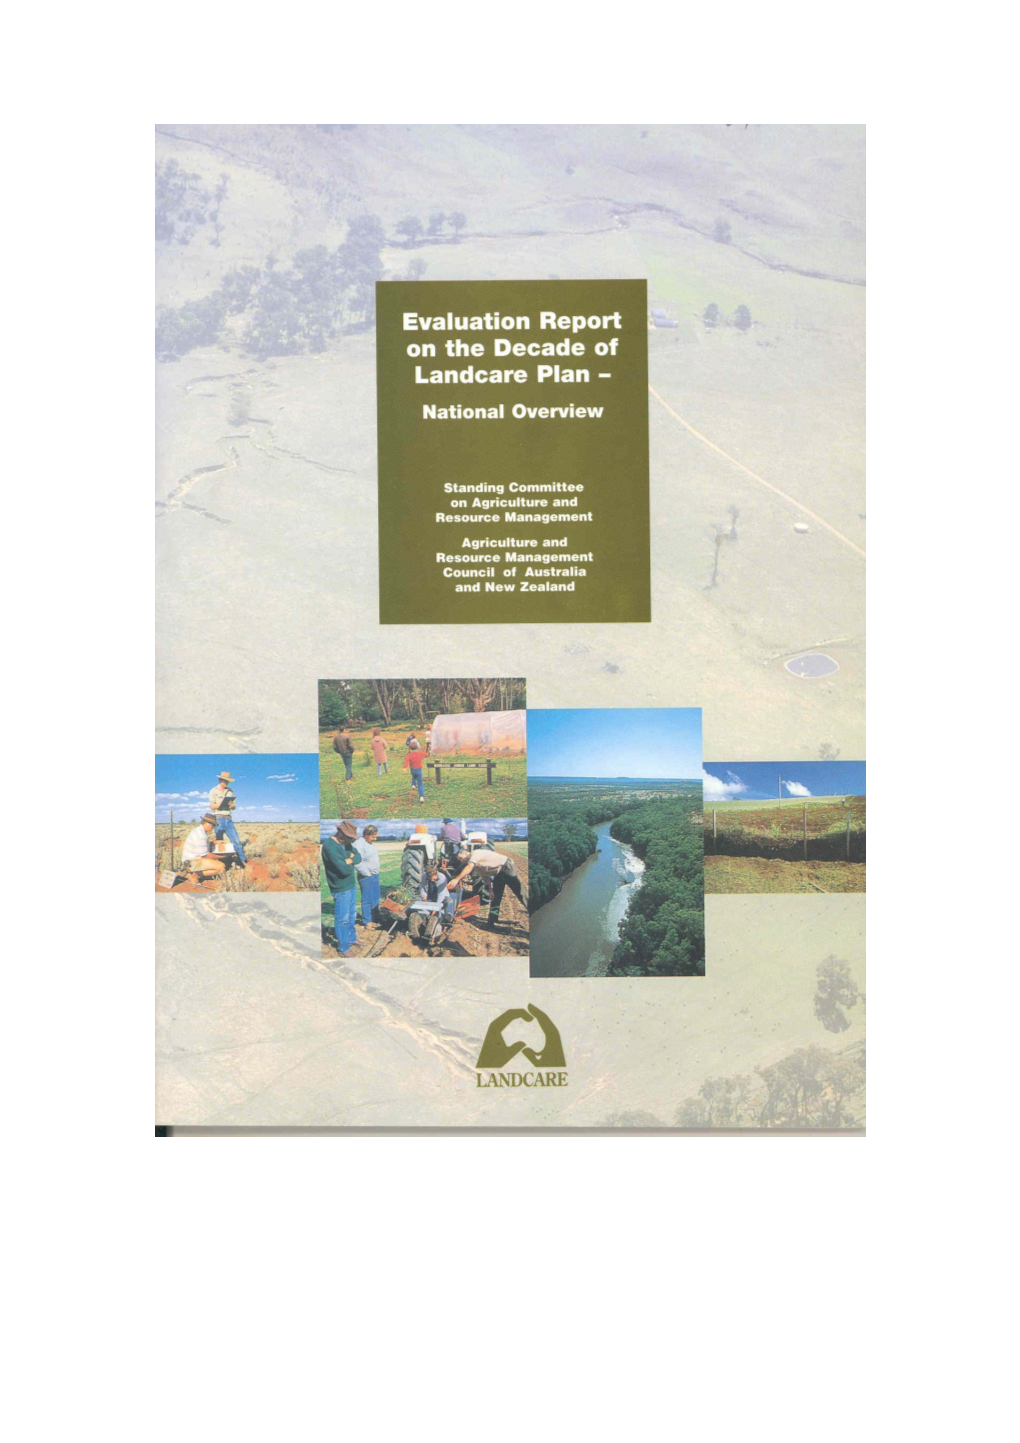 Evaluation Report on the Decade of Landcare Plan - National Overview